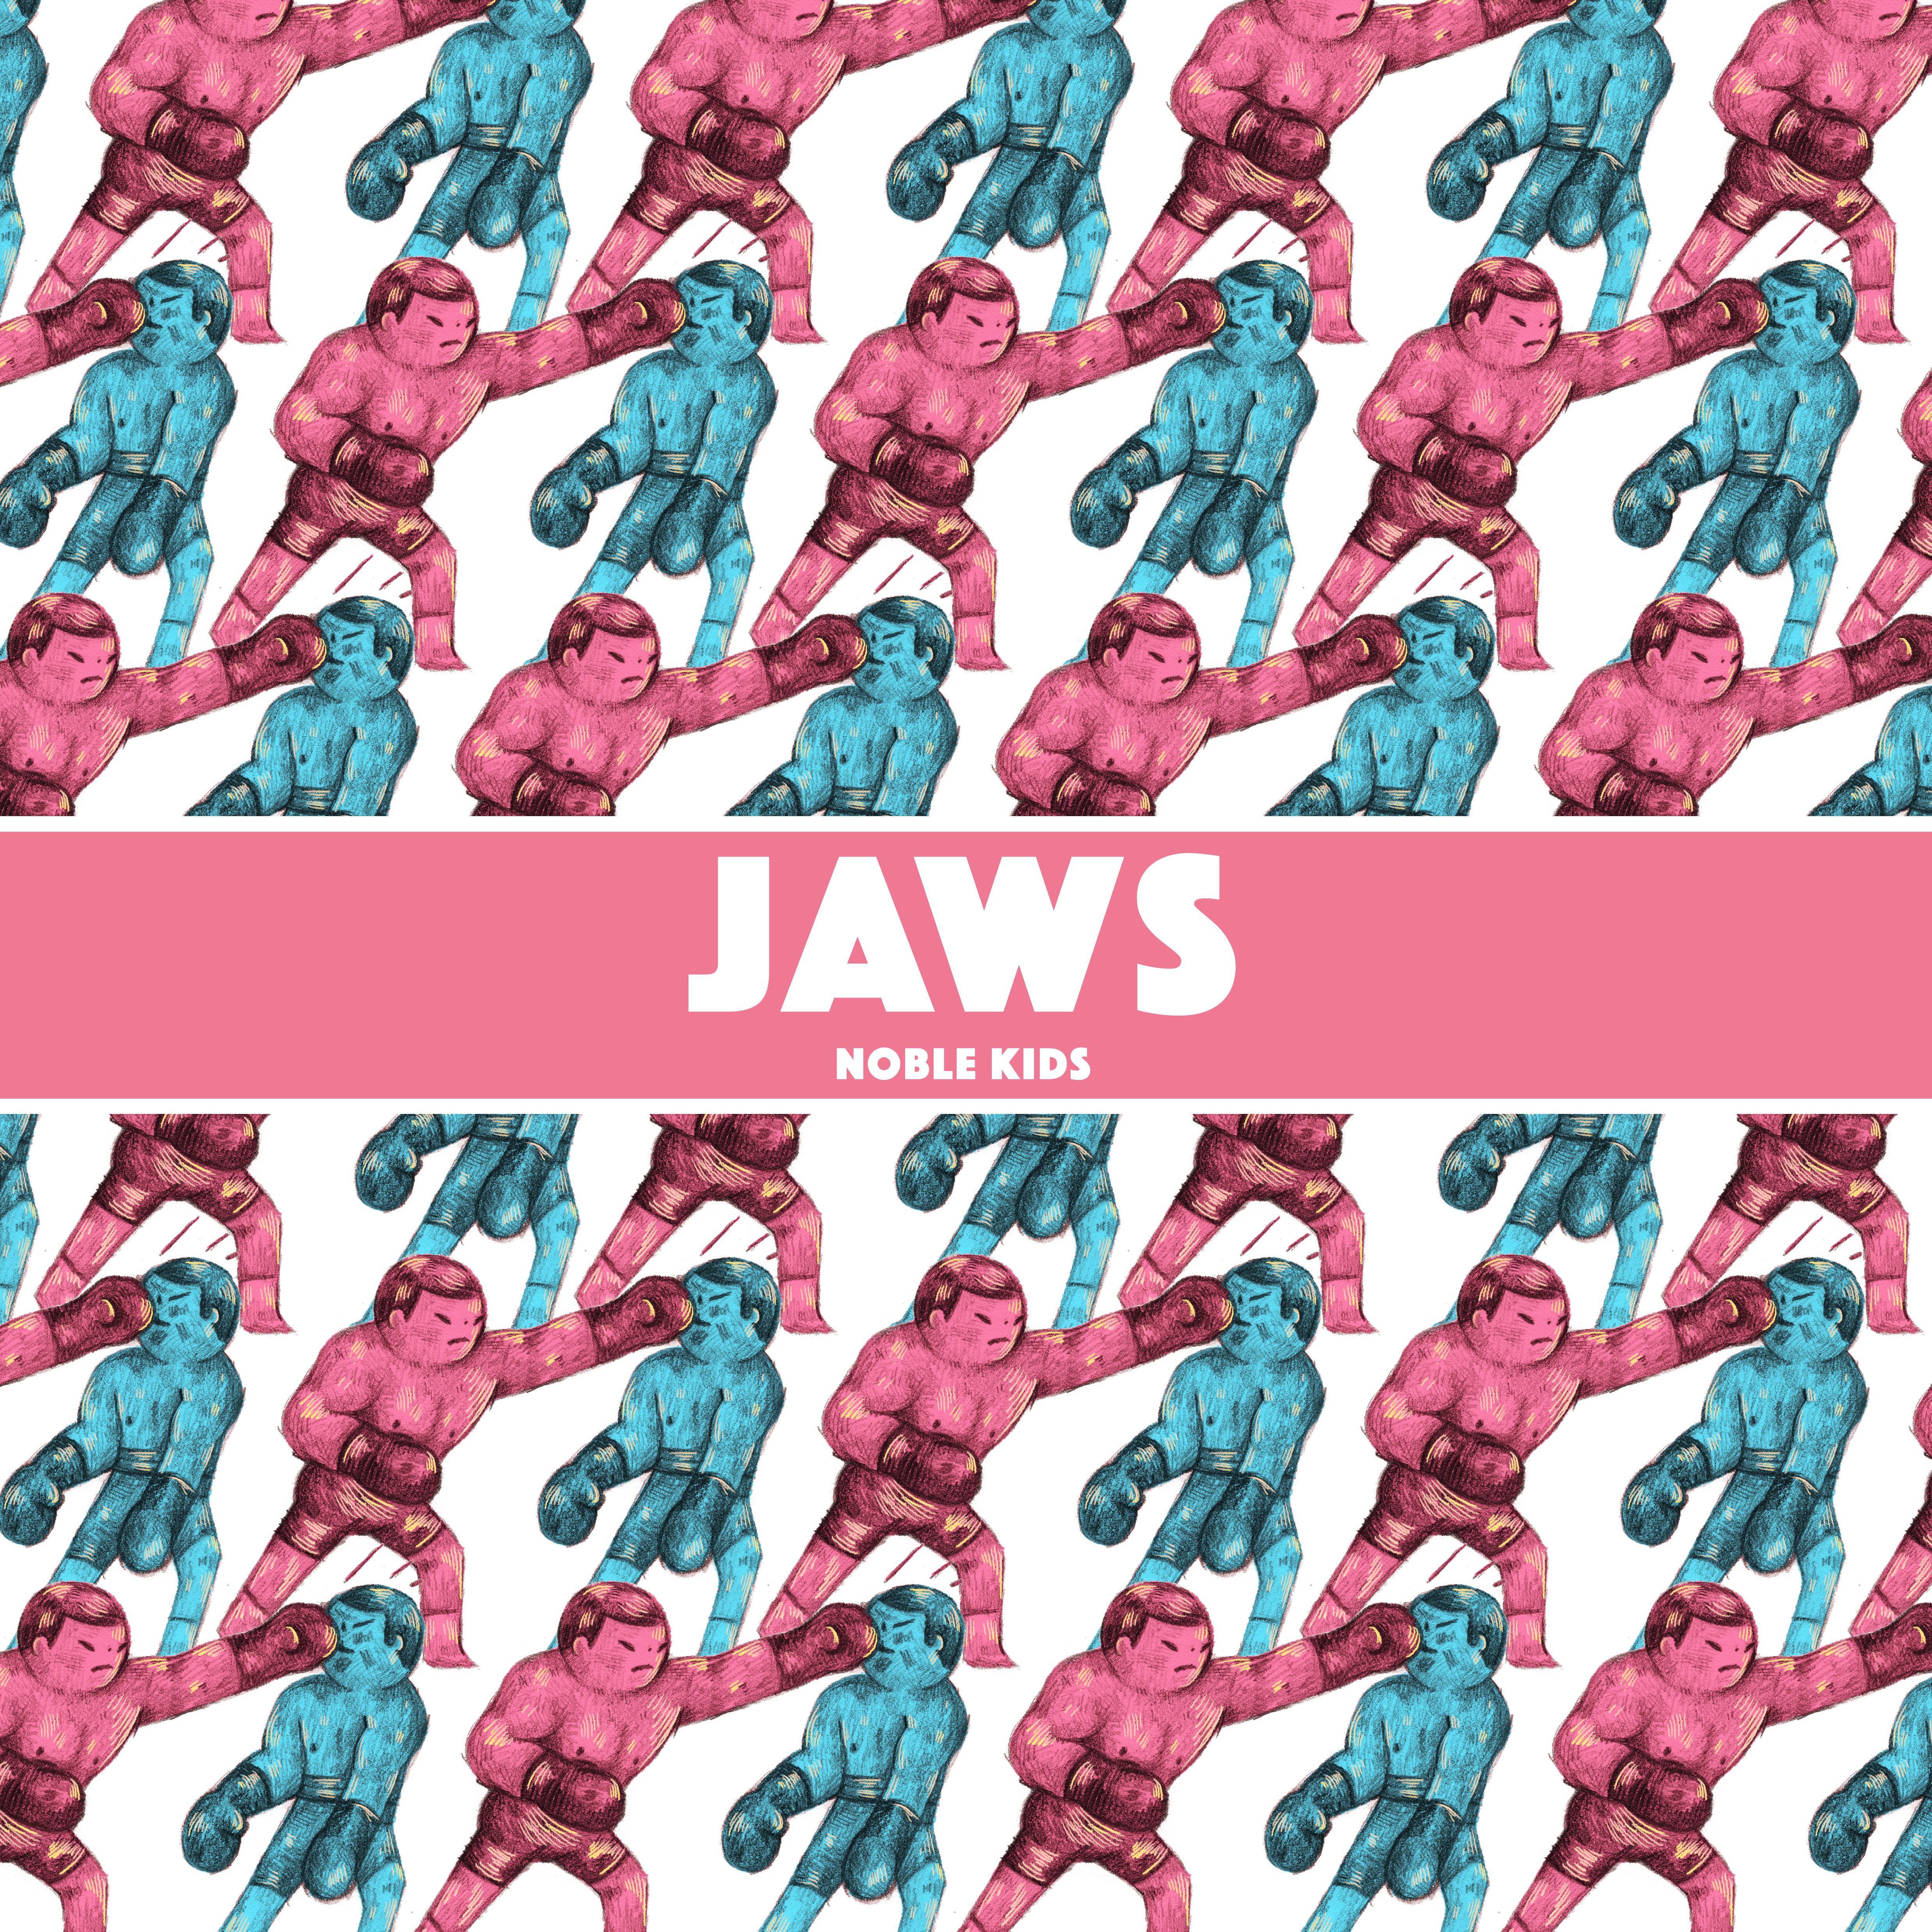 Noble Kids – “Jaws”